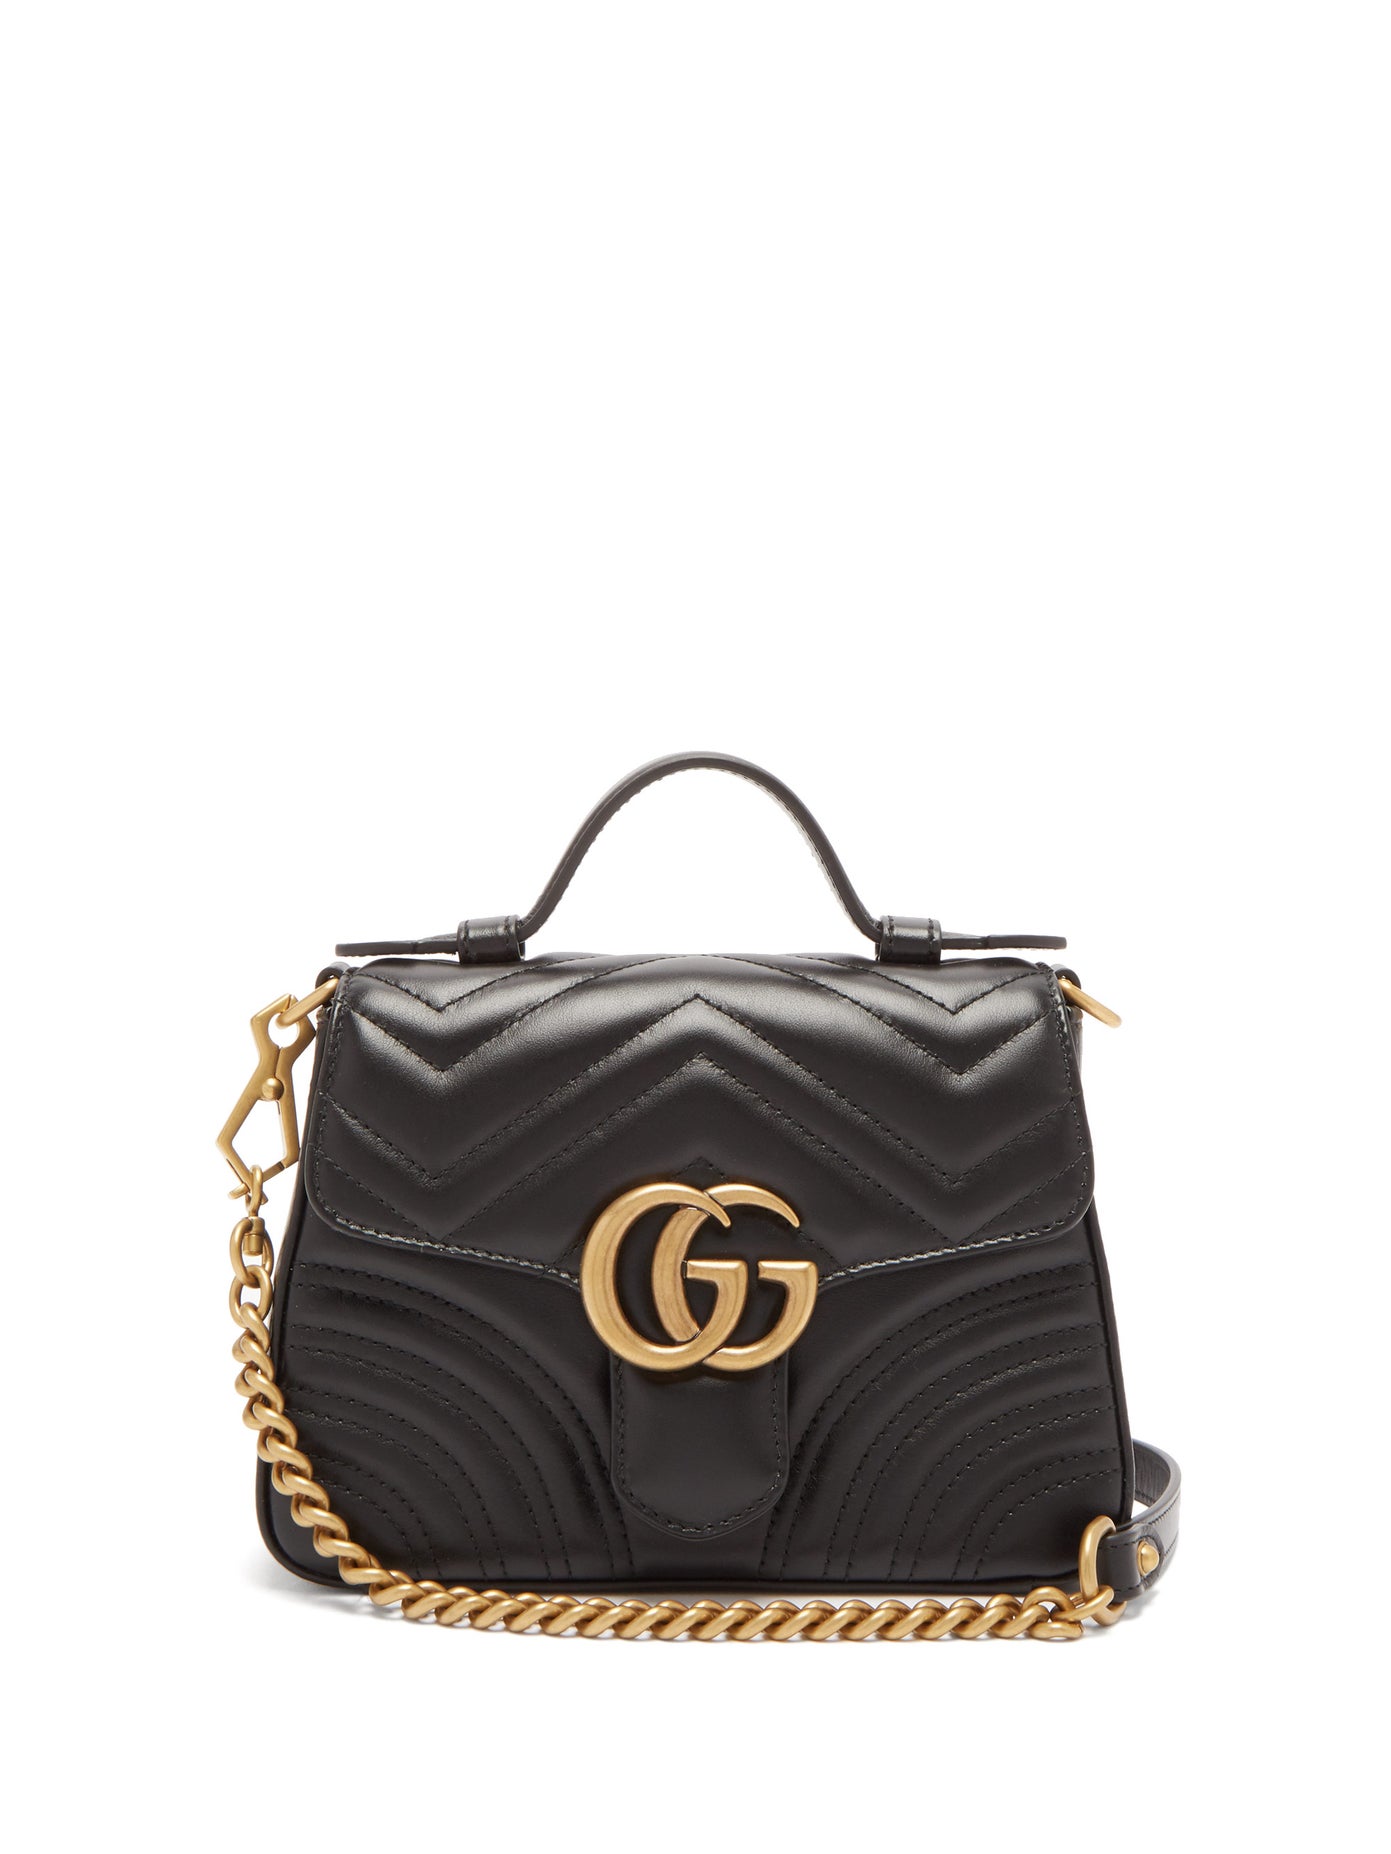 Gucci - Gg Marmont Mini Quilted-Leather Cross-Body Bag | FASHION STYLE FAN